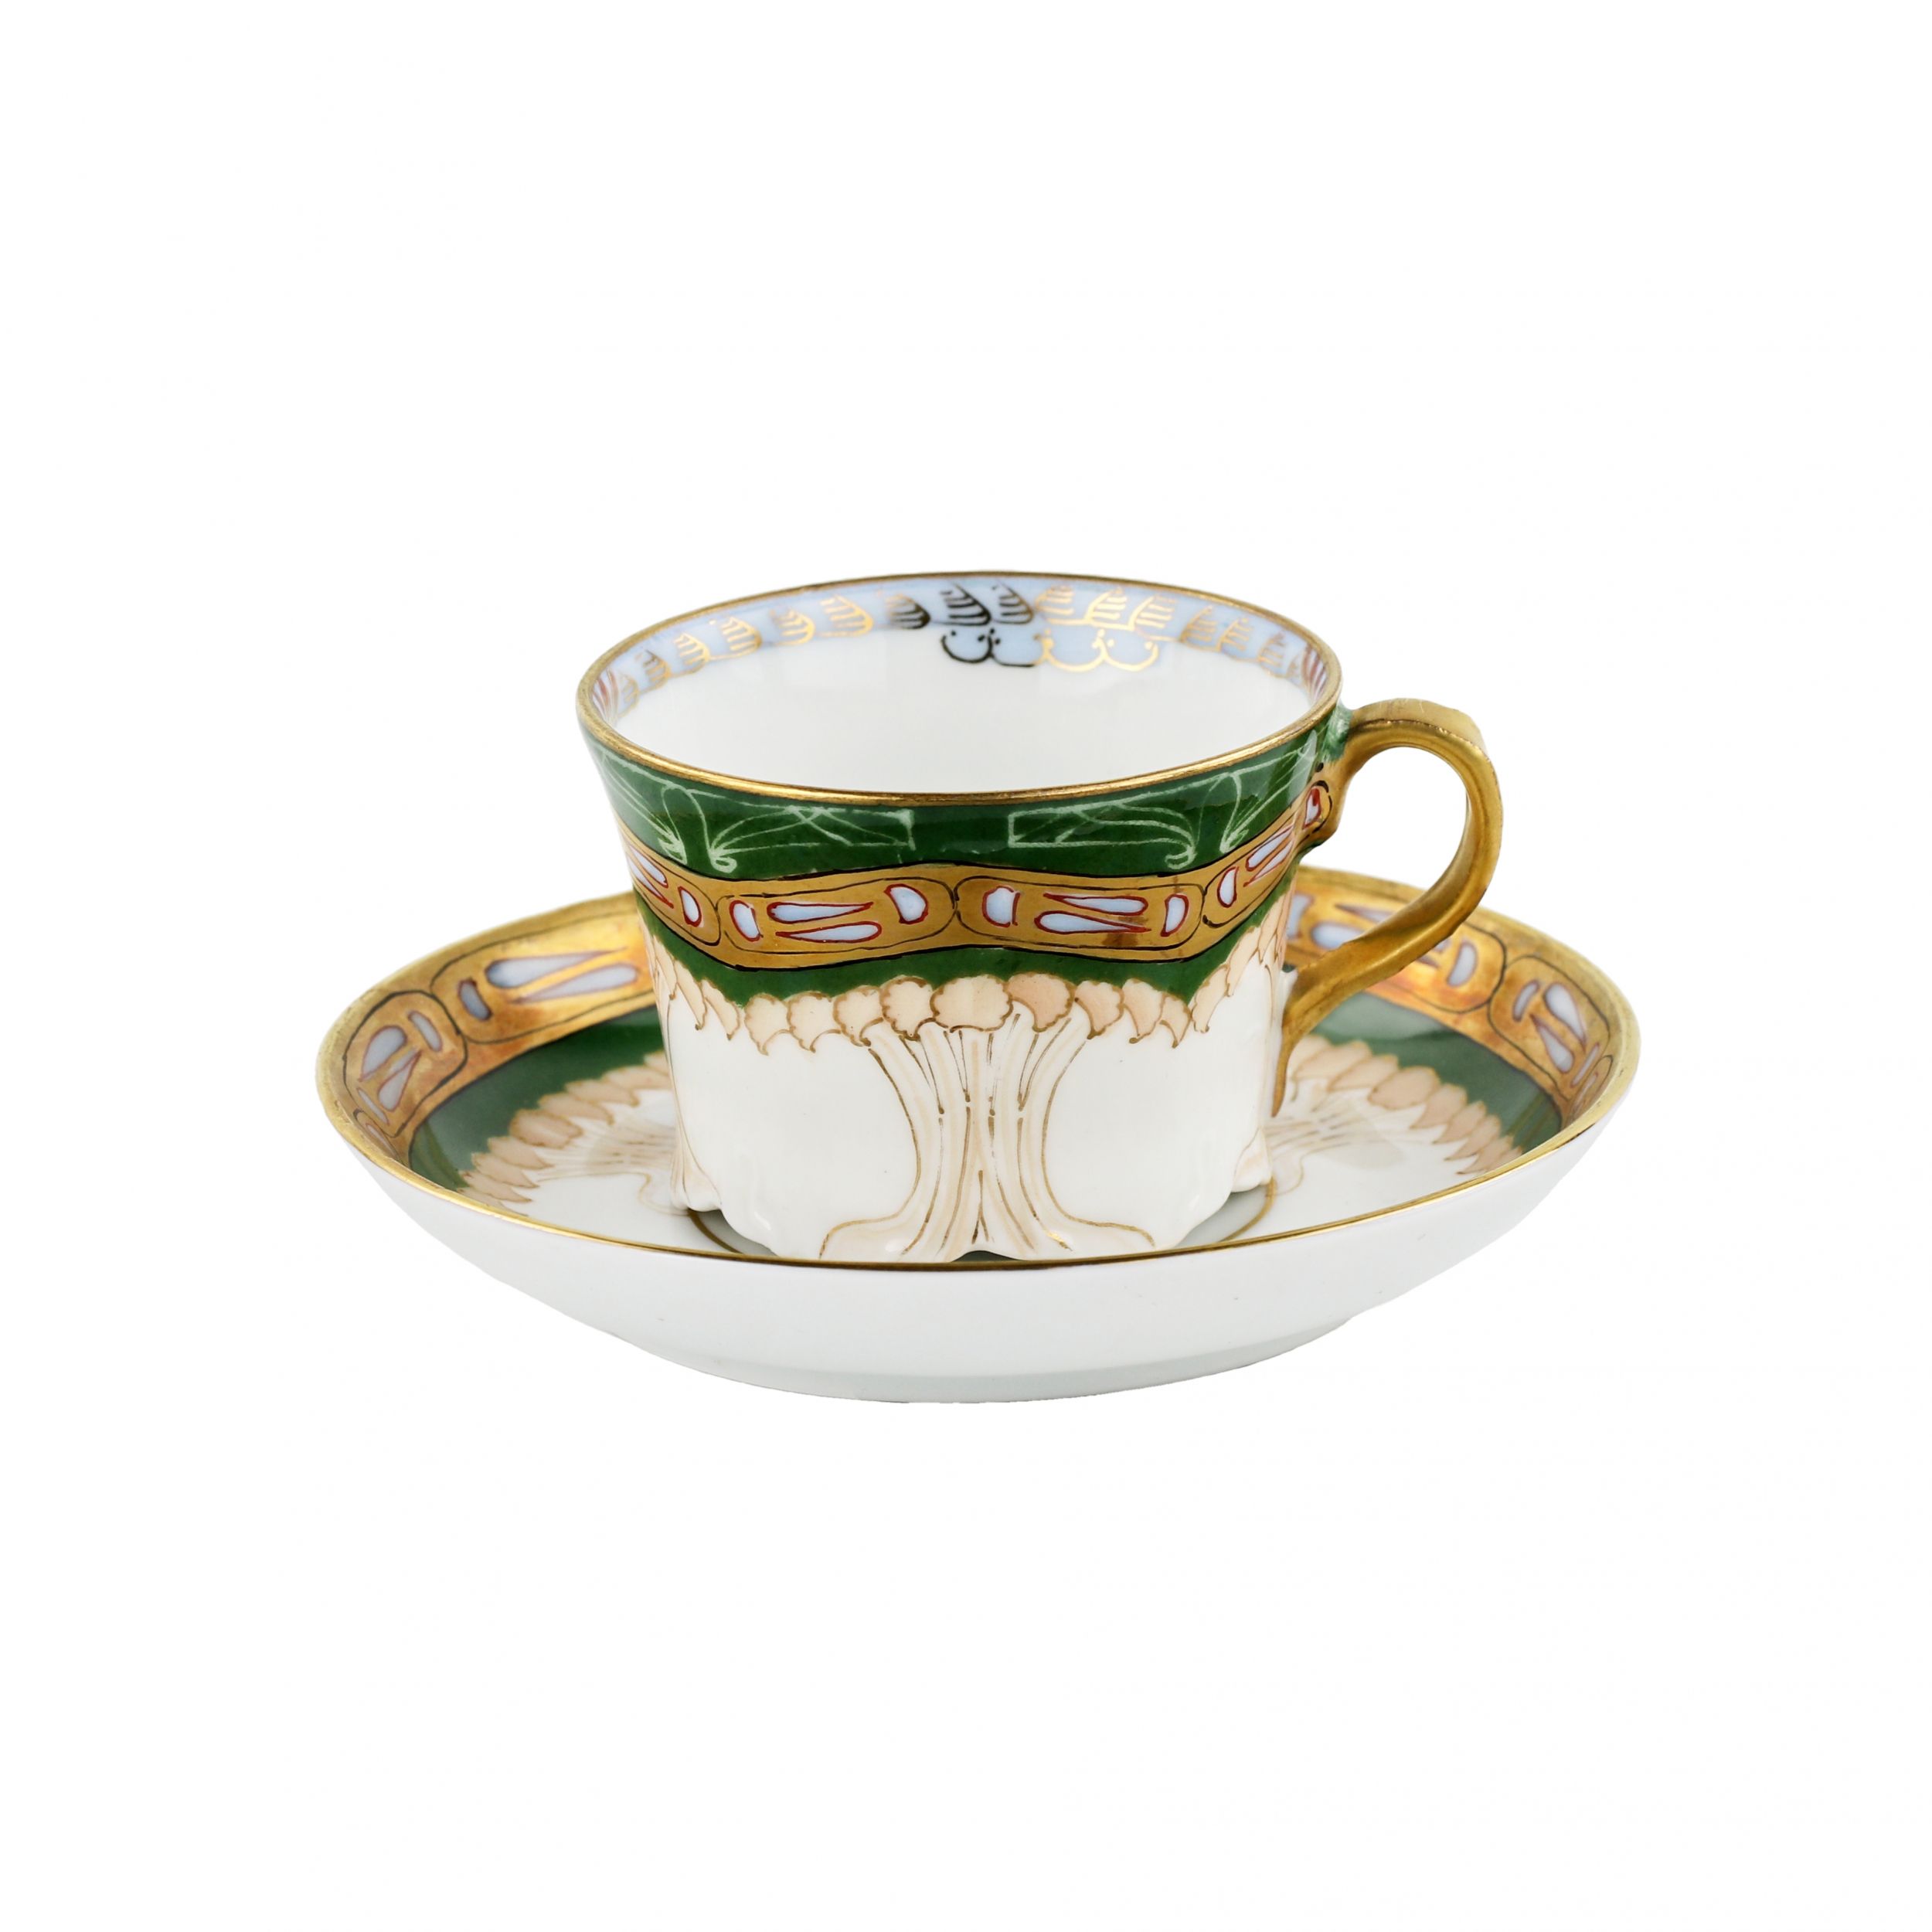 Coffee-pair-in-Art-Nouveau-style-Gardner-factory-Russia-late-19th-century-